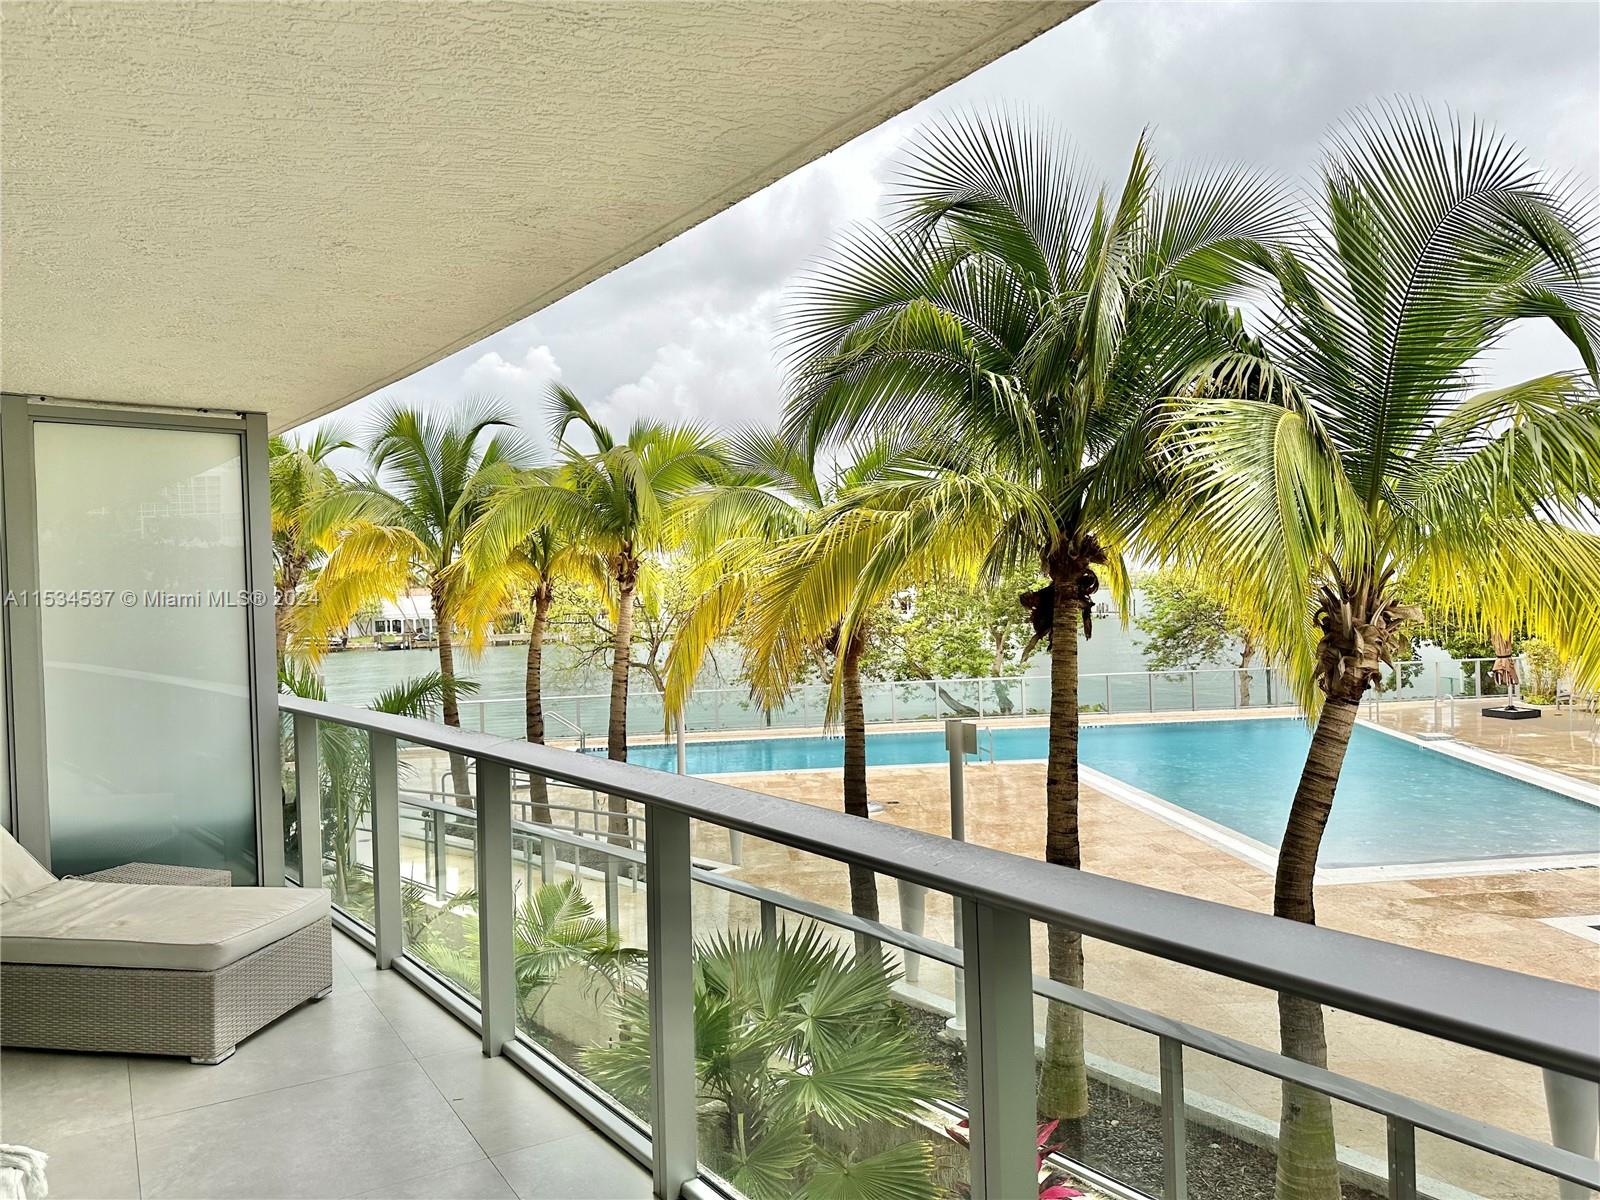 TURN KEY Fully Furnished 2 bedroom 2 full bathrooms with water views!, Enjoy amazing sunsets at it's large balcony overlooking the bay and pool. Tastefully furnished residence at brand new building in Miami Beach designed by renowned architect Luis Revuelta. Perfect location walking distance to shopping, restaurants and 2 blocks from the beach. Bosh brand new appliances. Bay side pool, state of the art gym, spa and much more!